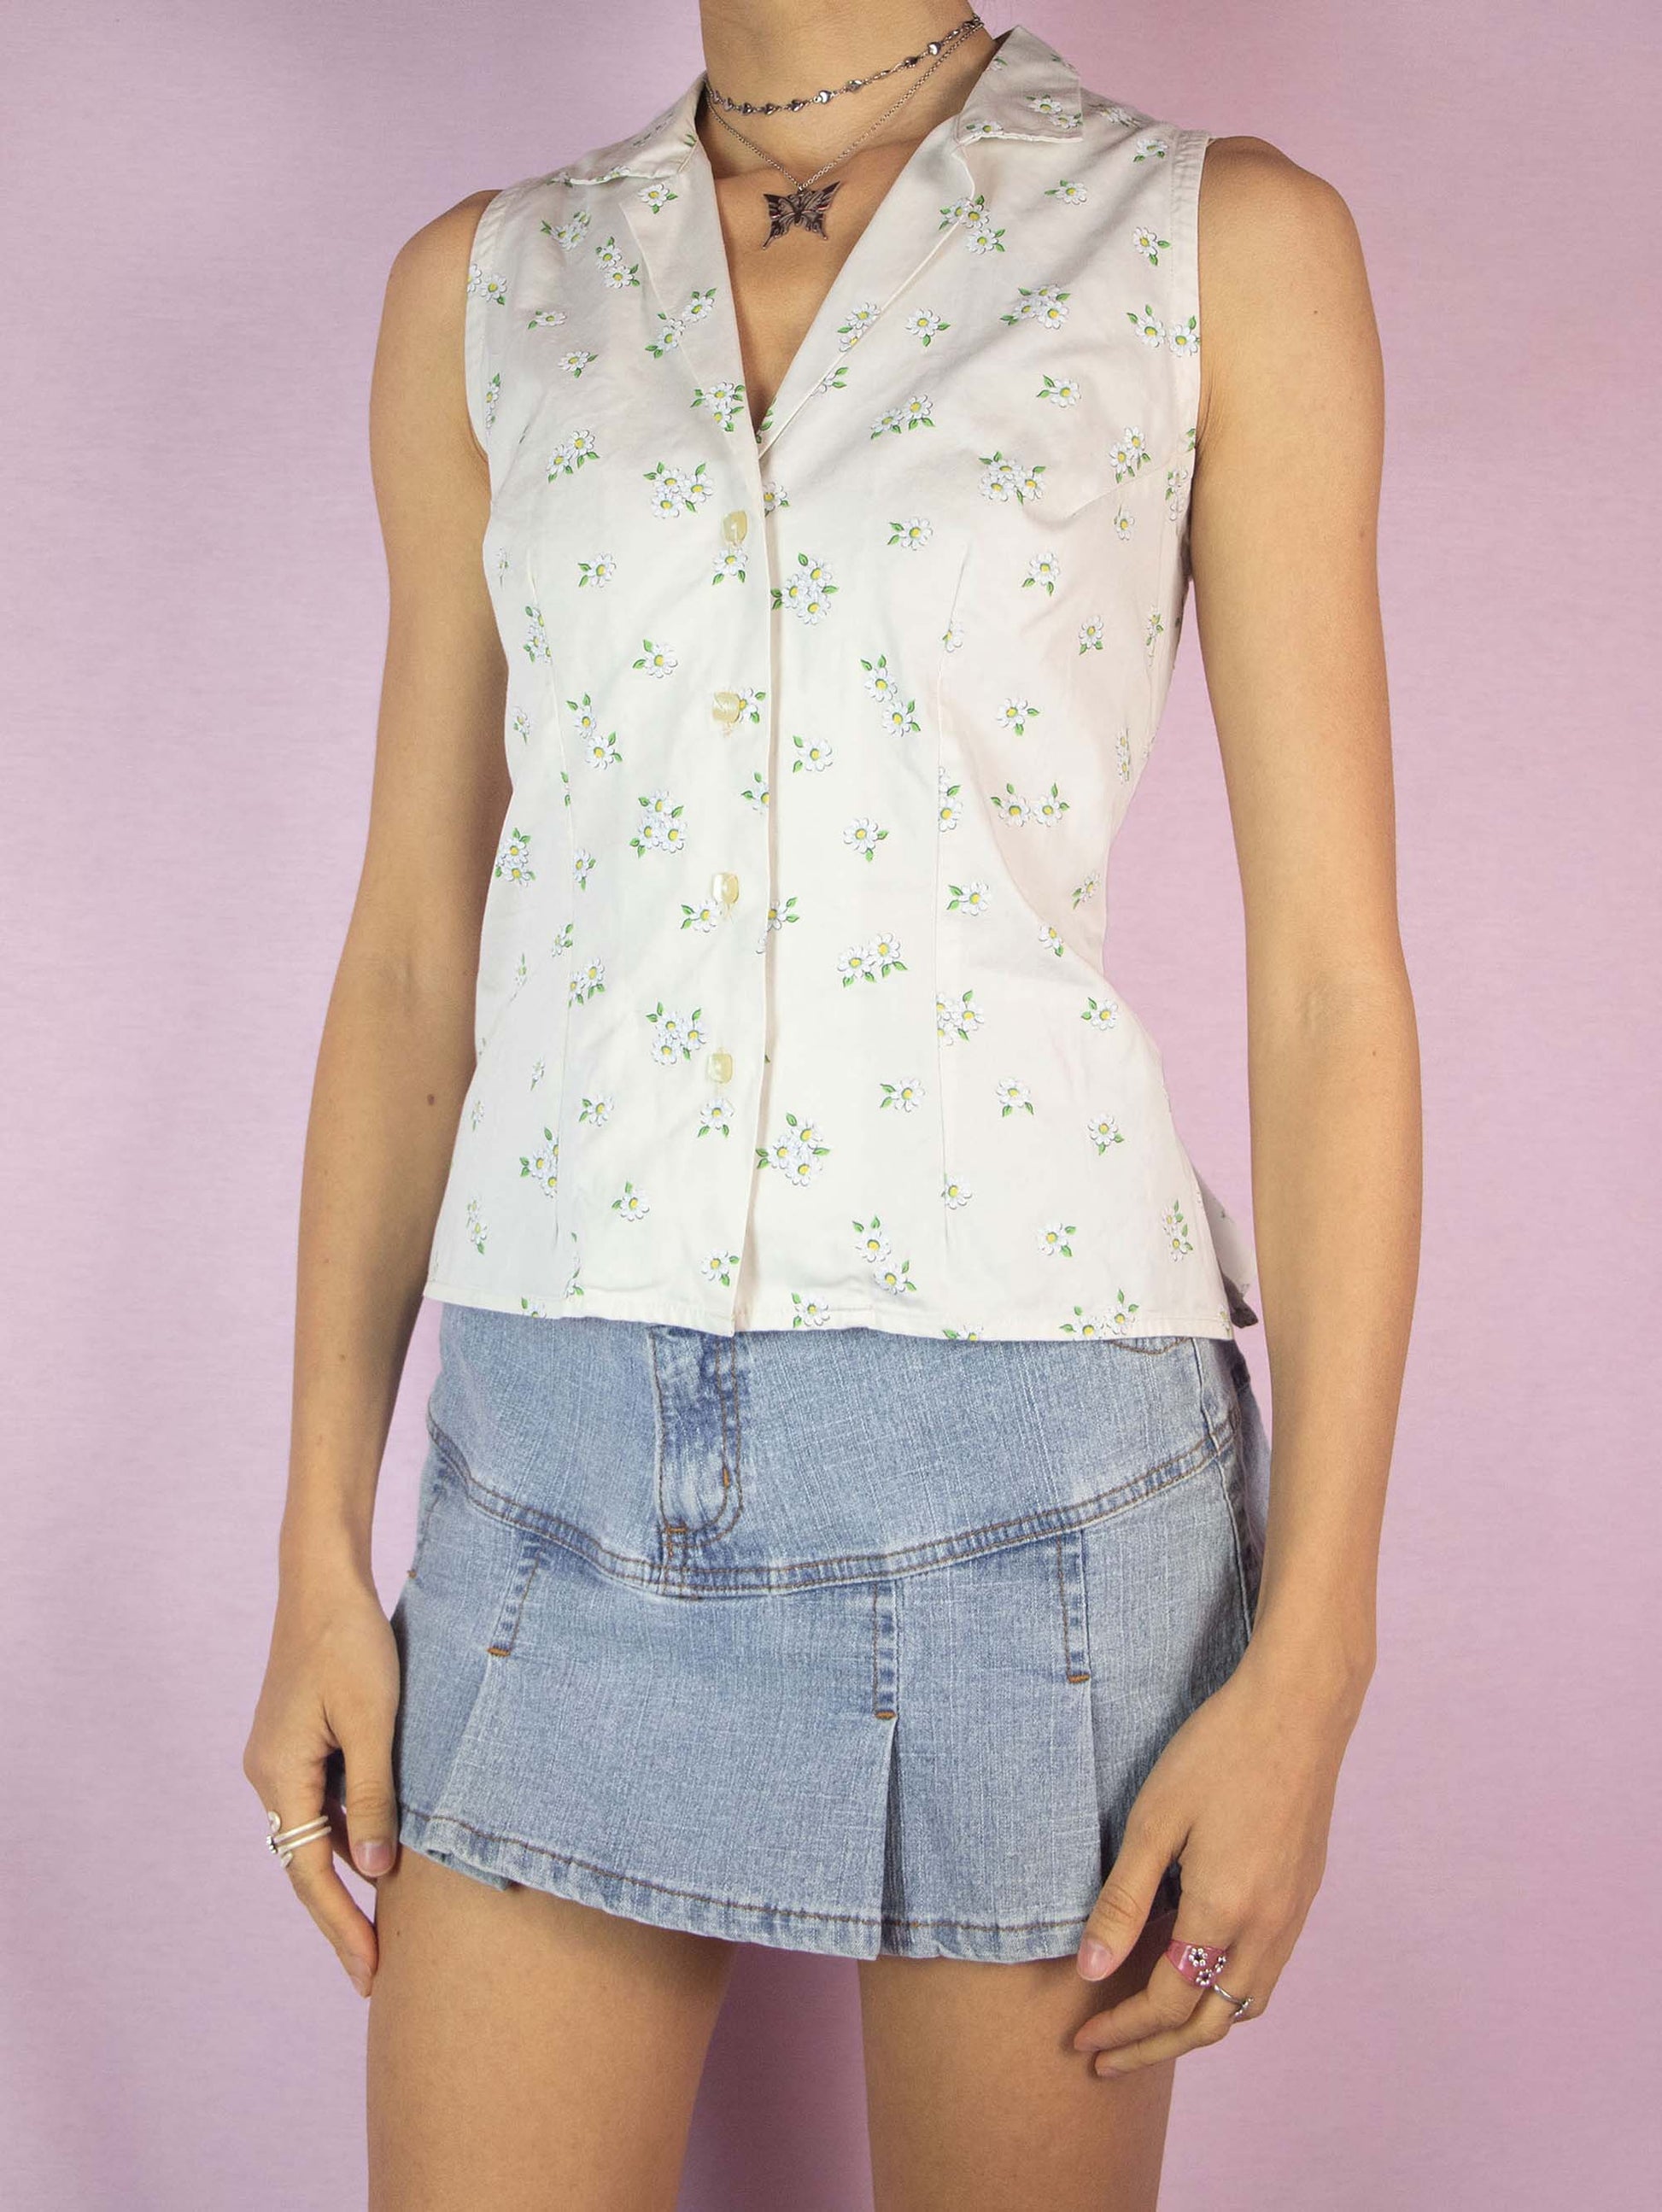 The Vintage 90s Sleeveless Floral Print Blouse is a boho cottage prairie summer off-white shirt with a daisy pattern, collar, and buttons.